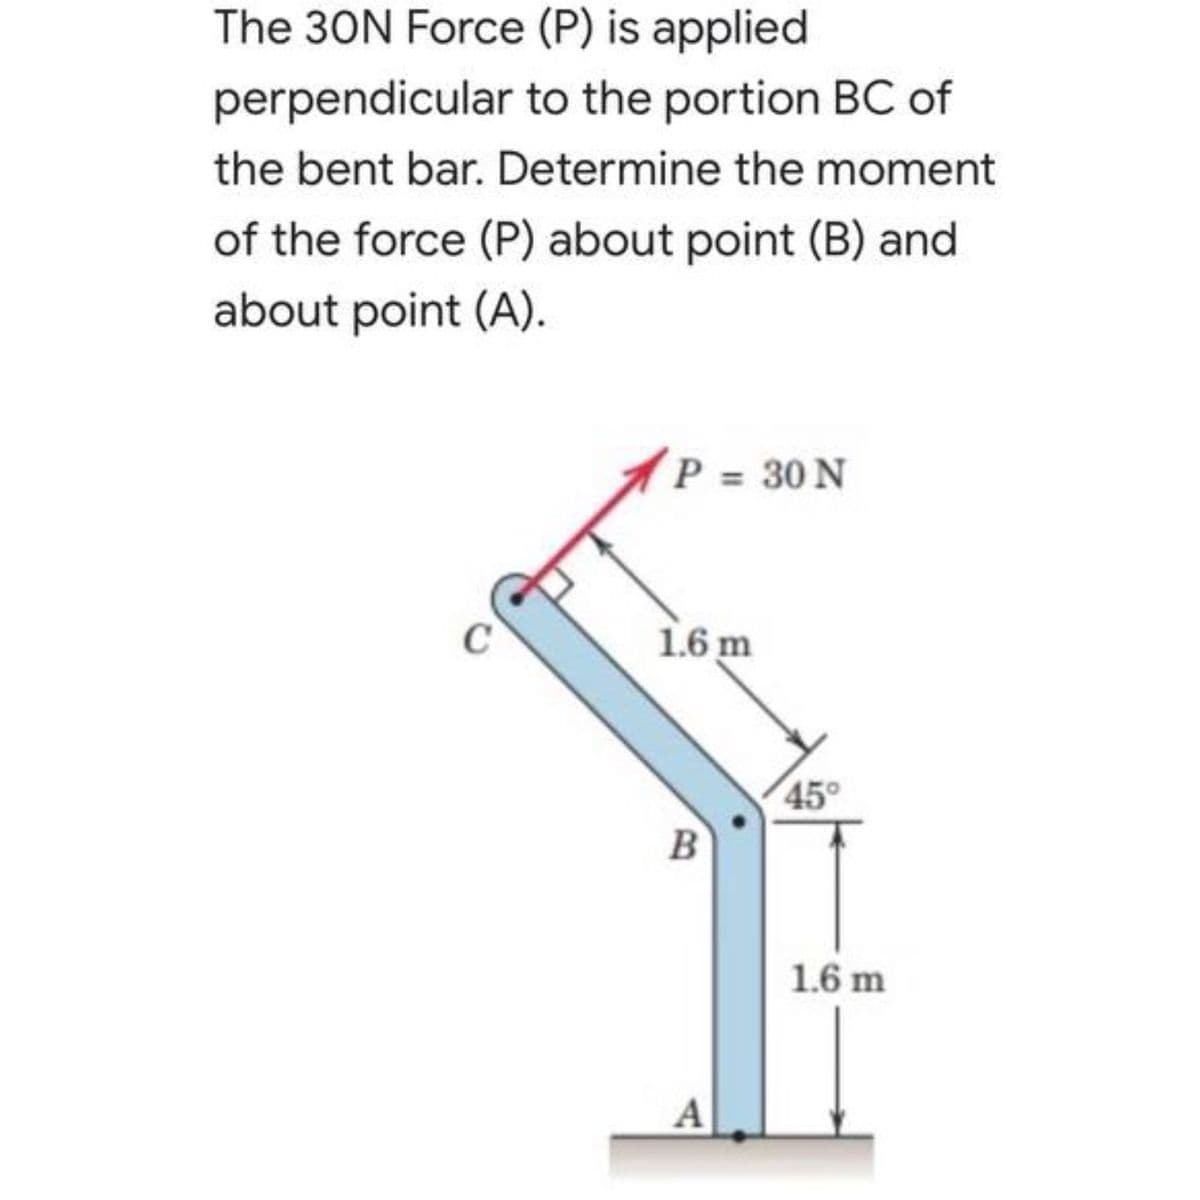 The 30N Force (P) is applied
perpendicular to the portion BC of
the bent bar. Determine the moment
of the force (P) about point (B) and
about point (A).
P = 30 N
1.6 m
45°
1.6 m
